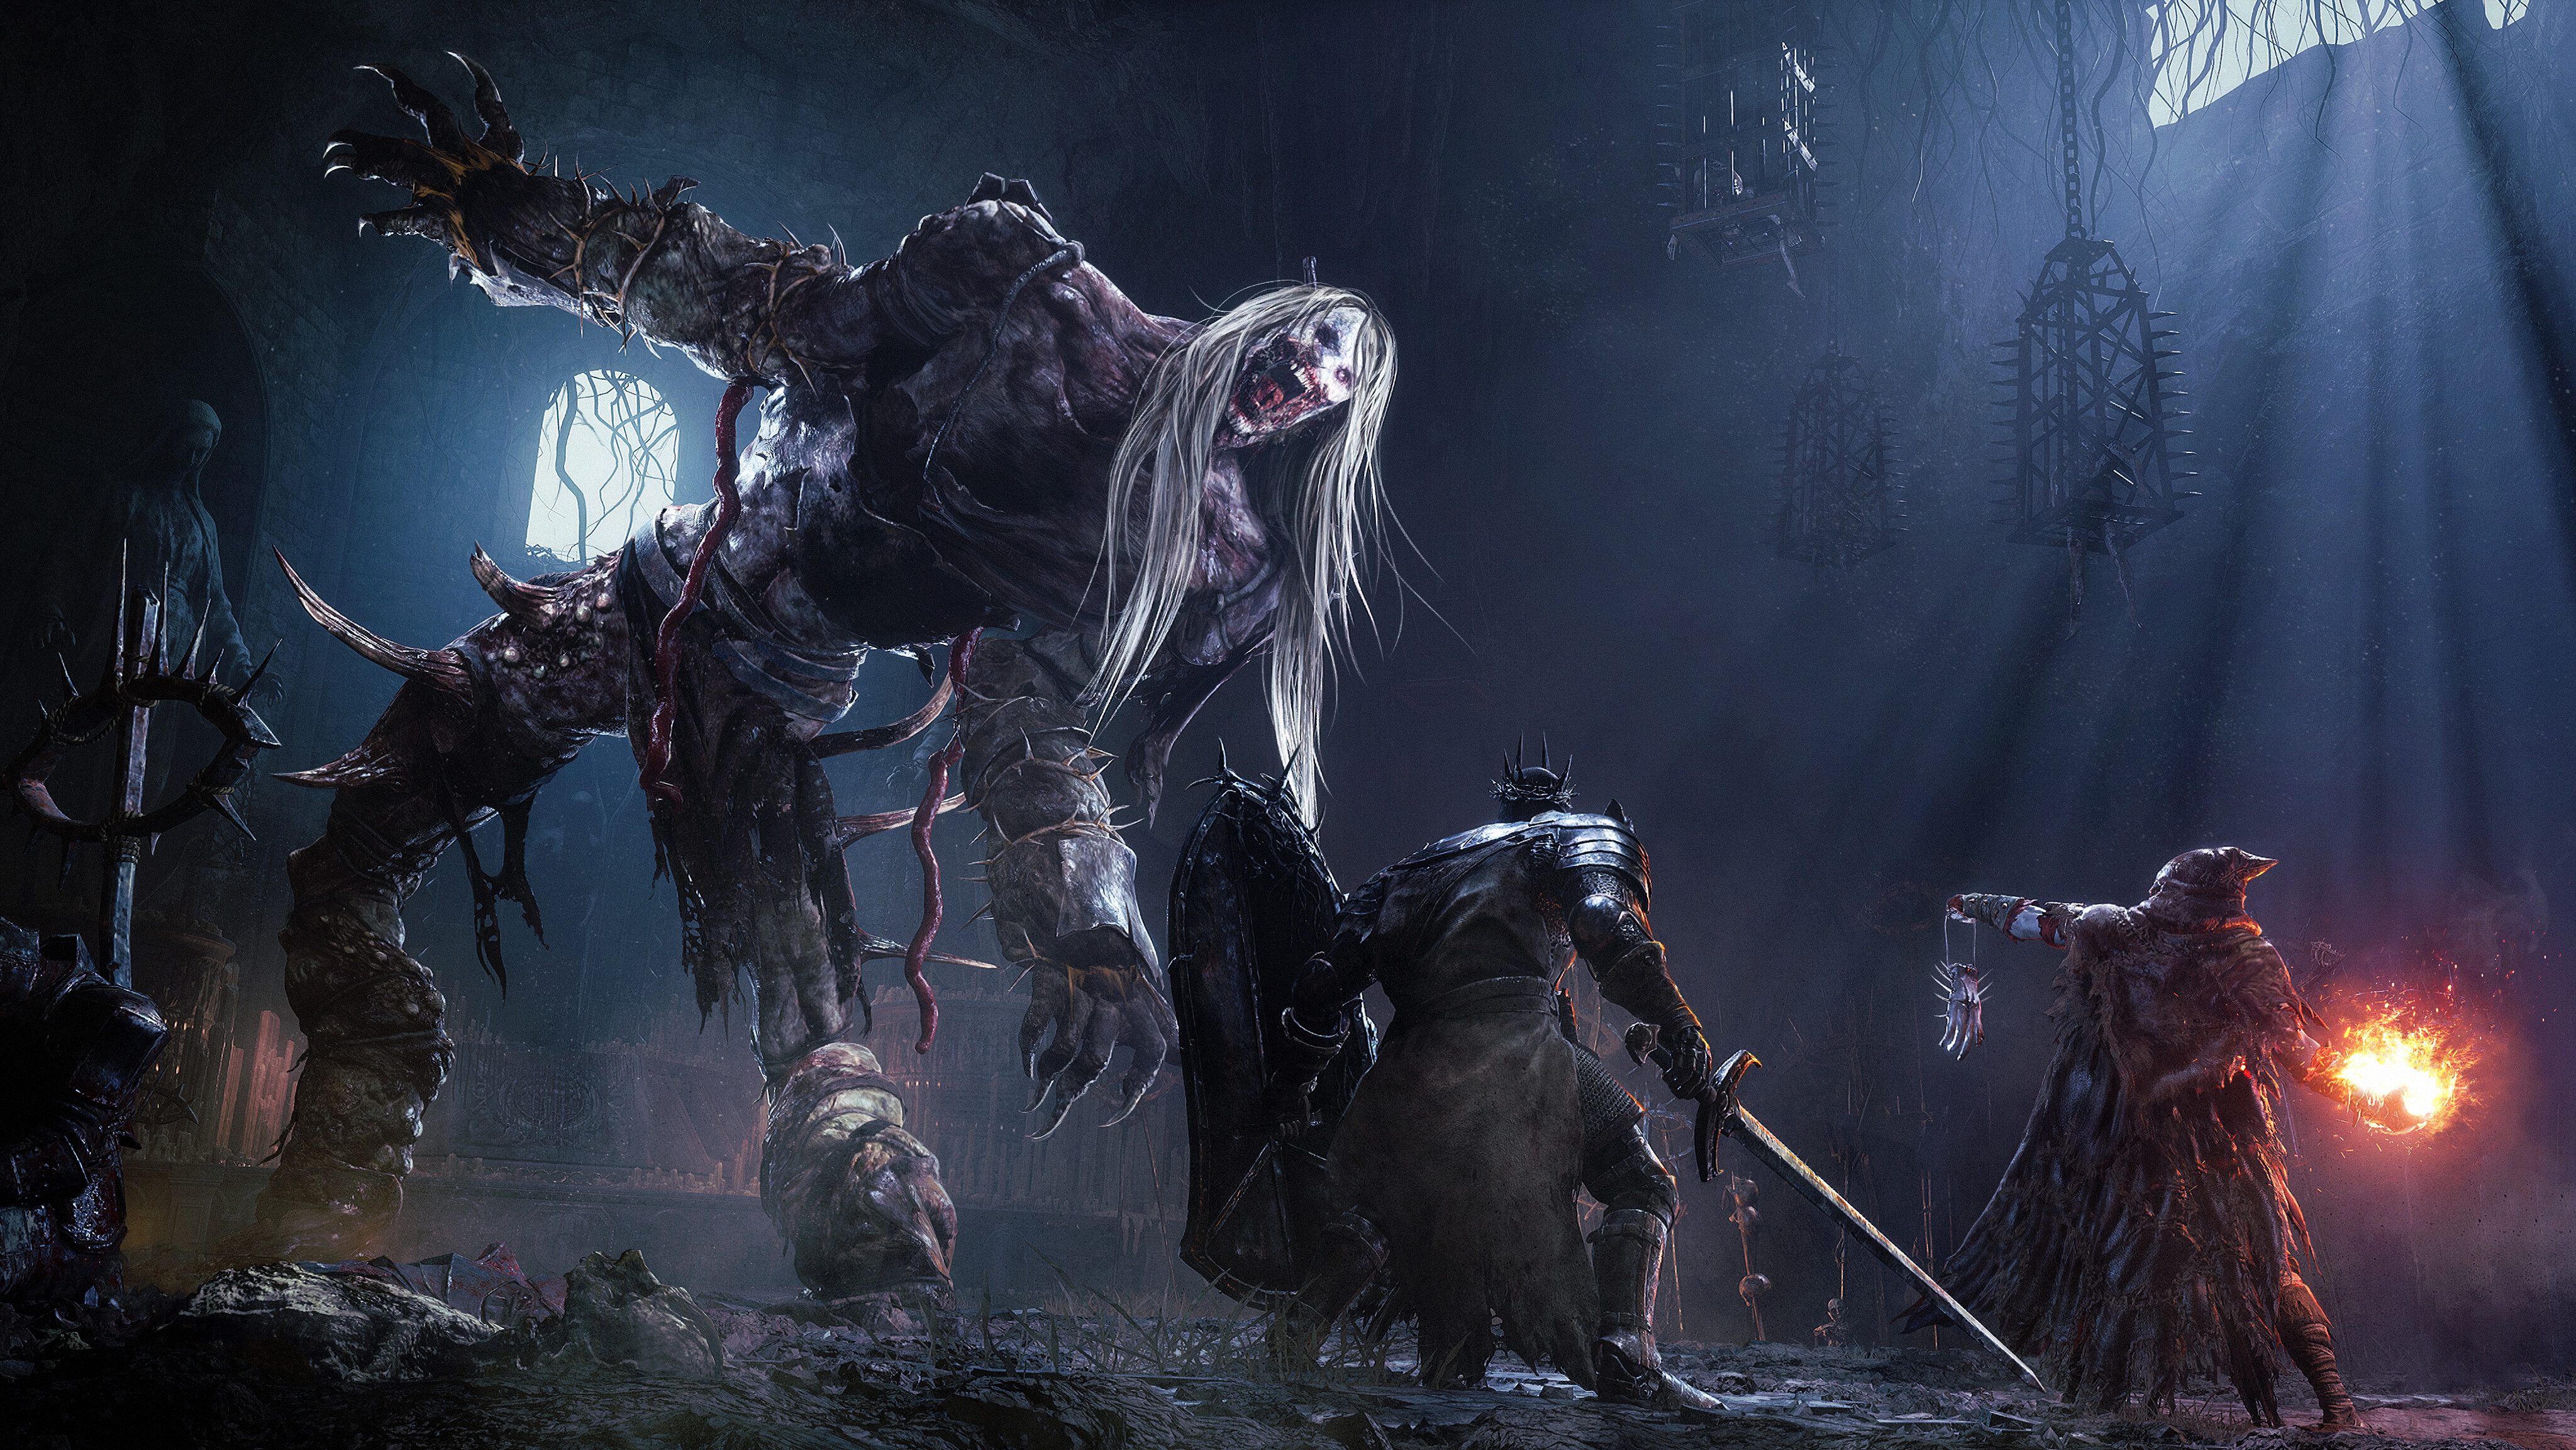  Lords of the Fallen    Lords of the Fallen,        Bloodborne